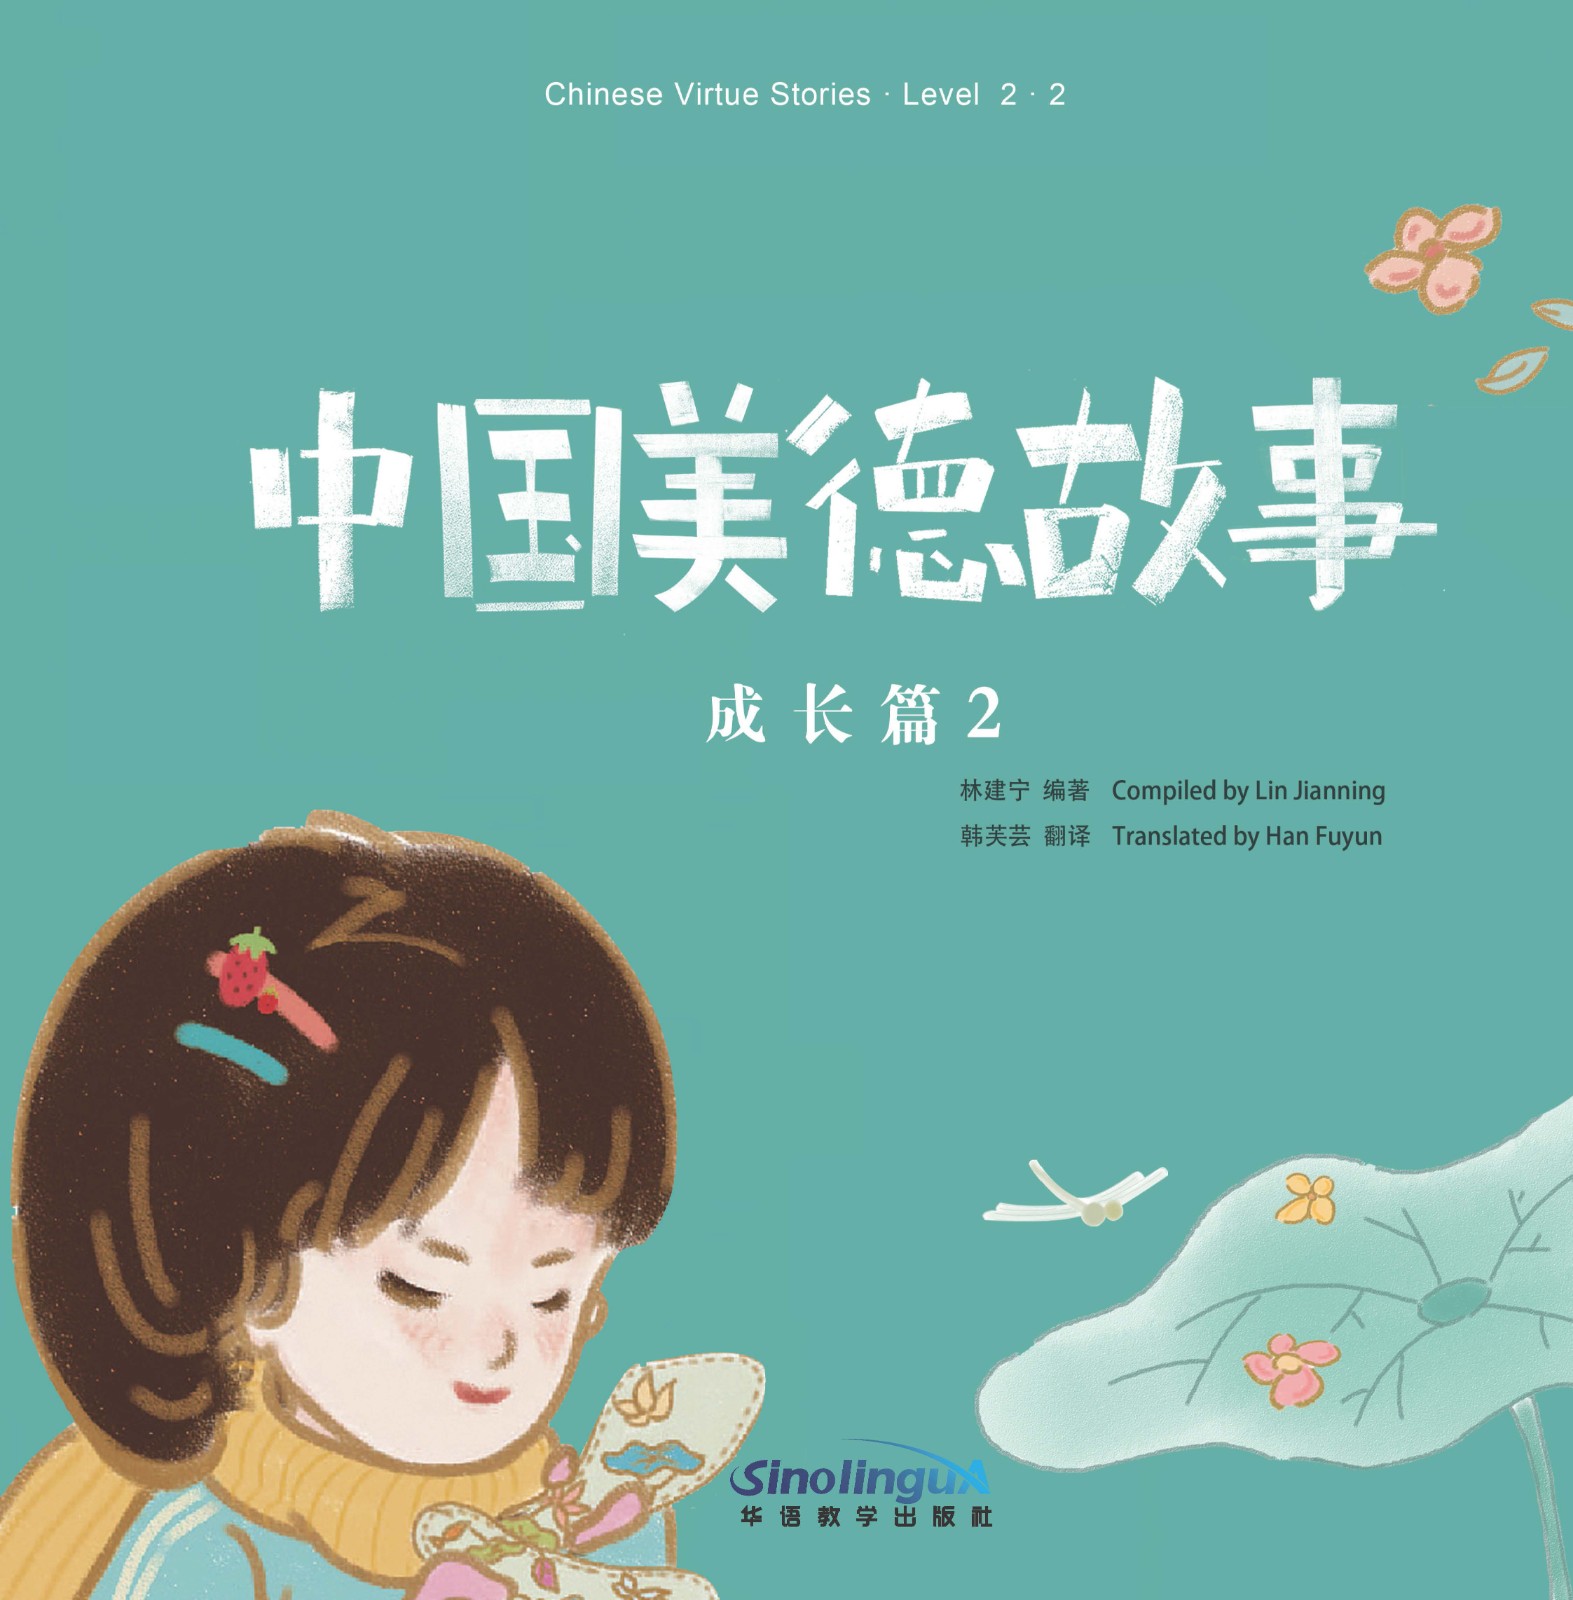 Chinses Virtue Stories·Level 2·2